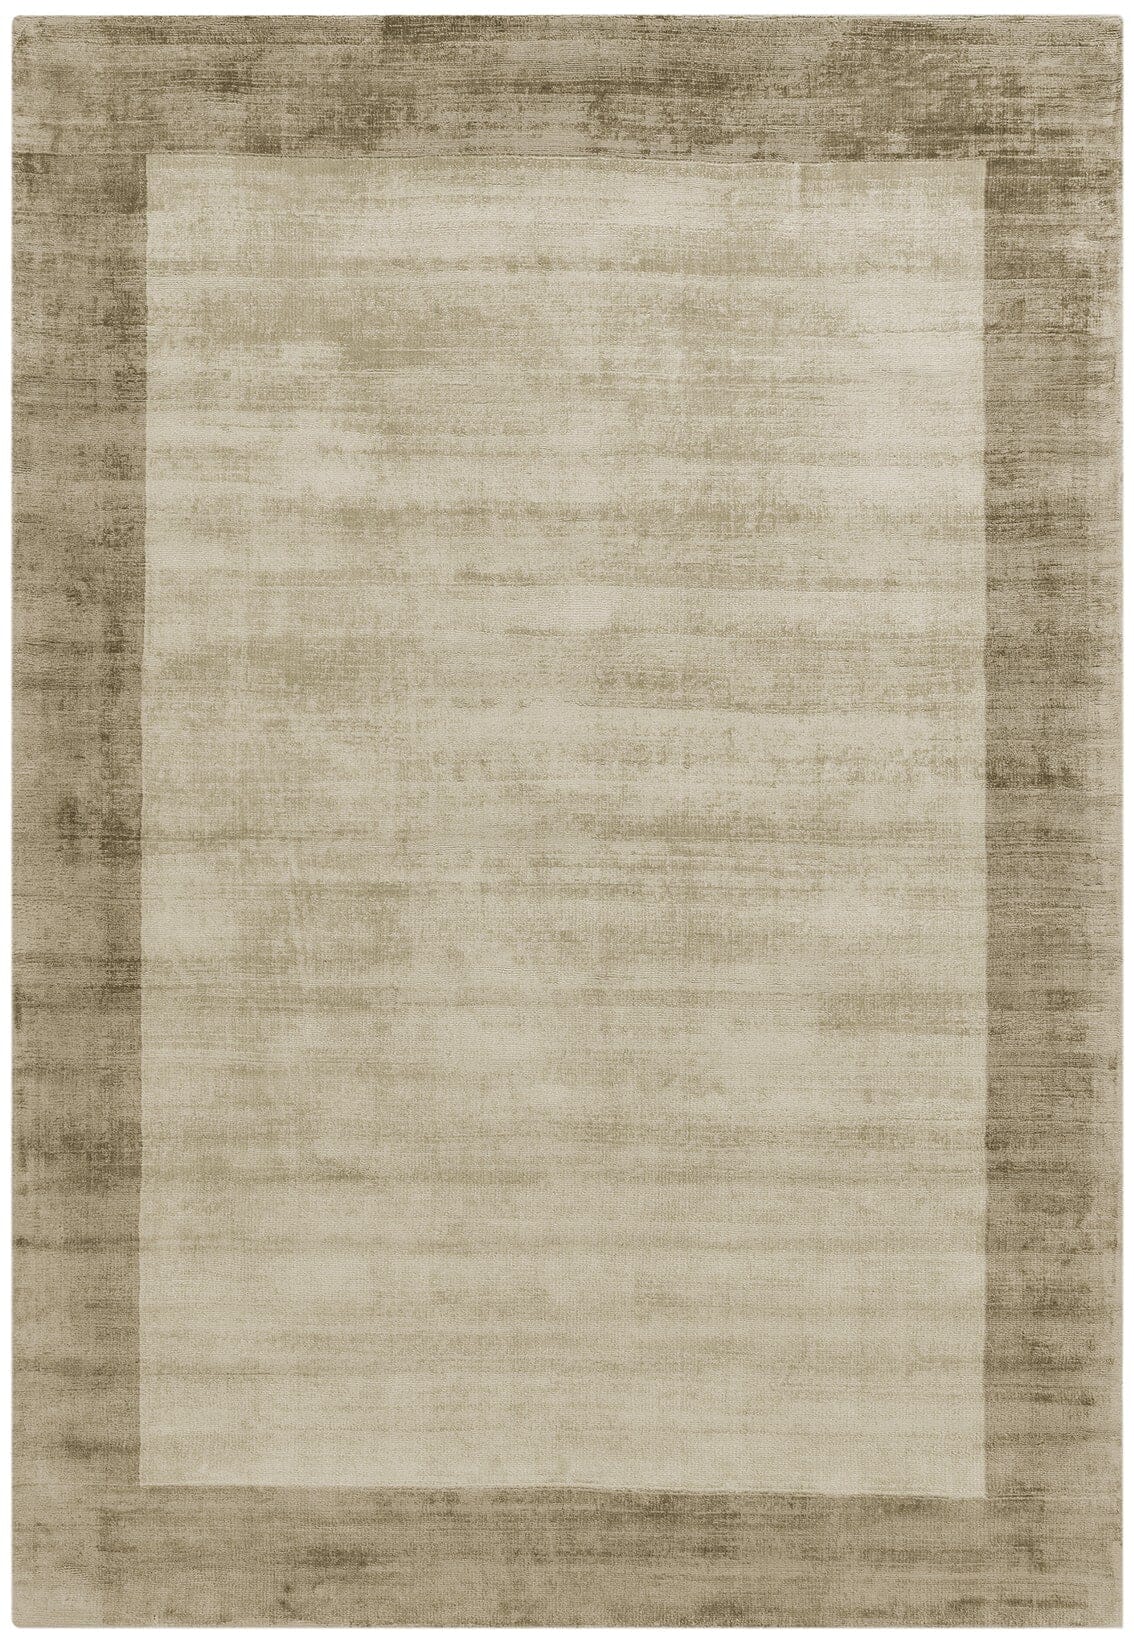  Asiatic Carpets-Asiatic Carpets Blade Hand Woven Rug Smoke Putty - 120 x 170cm-Grey, Silver 837 